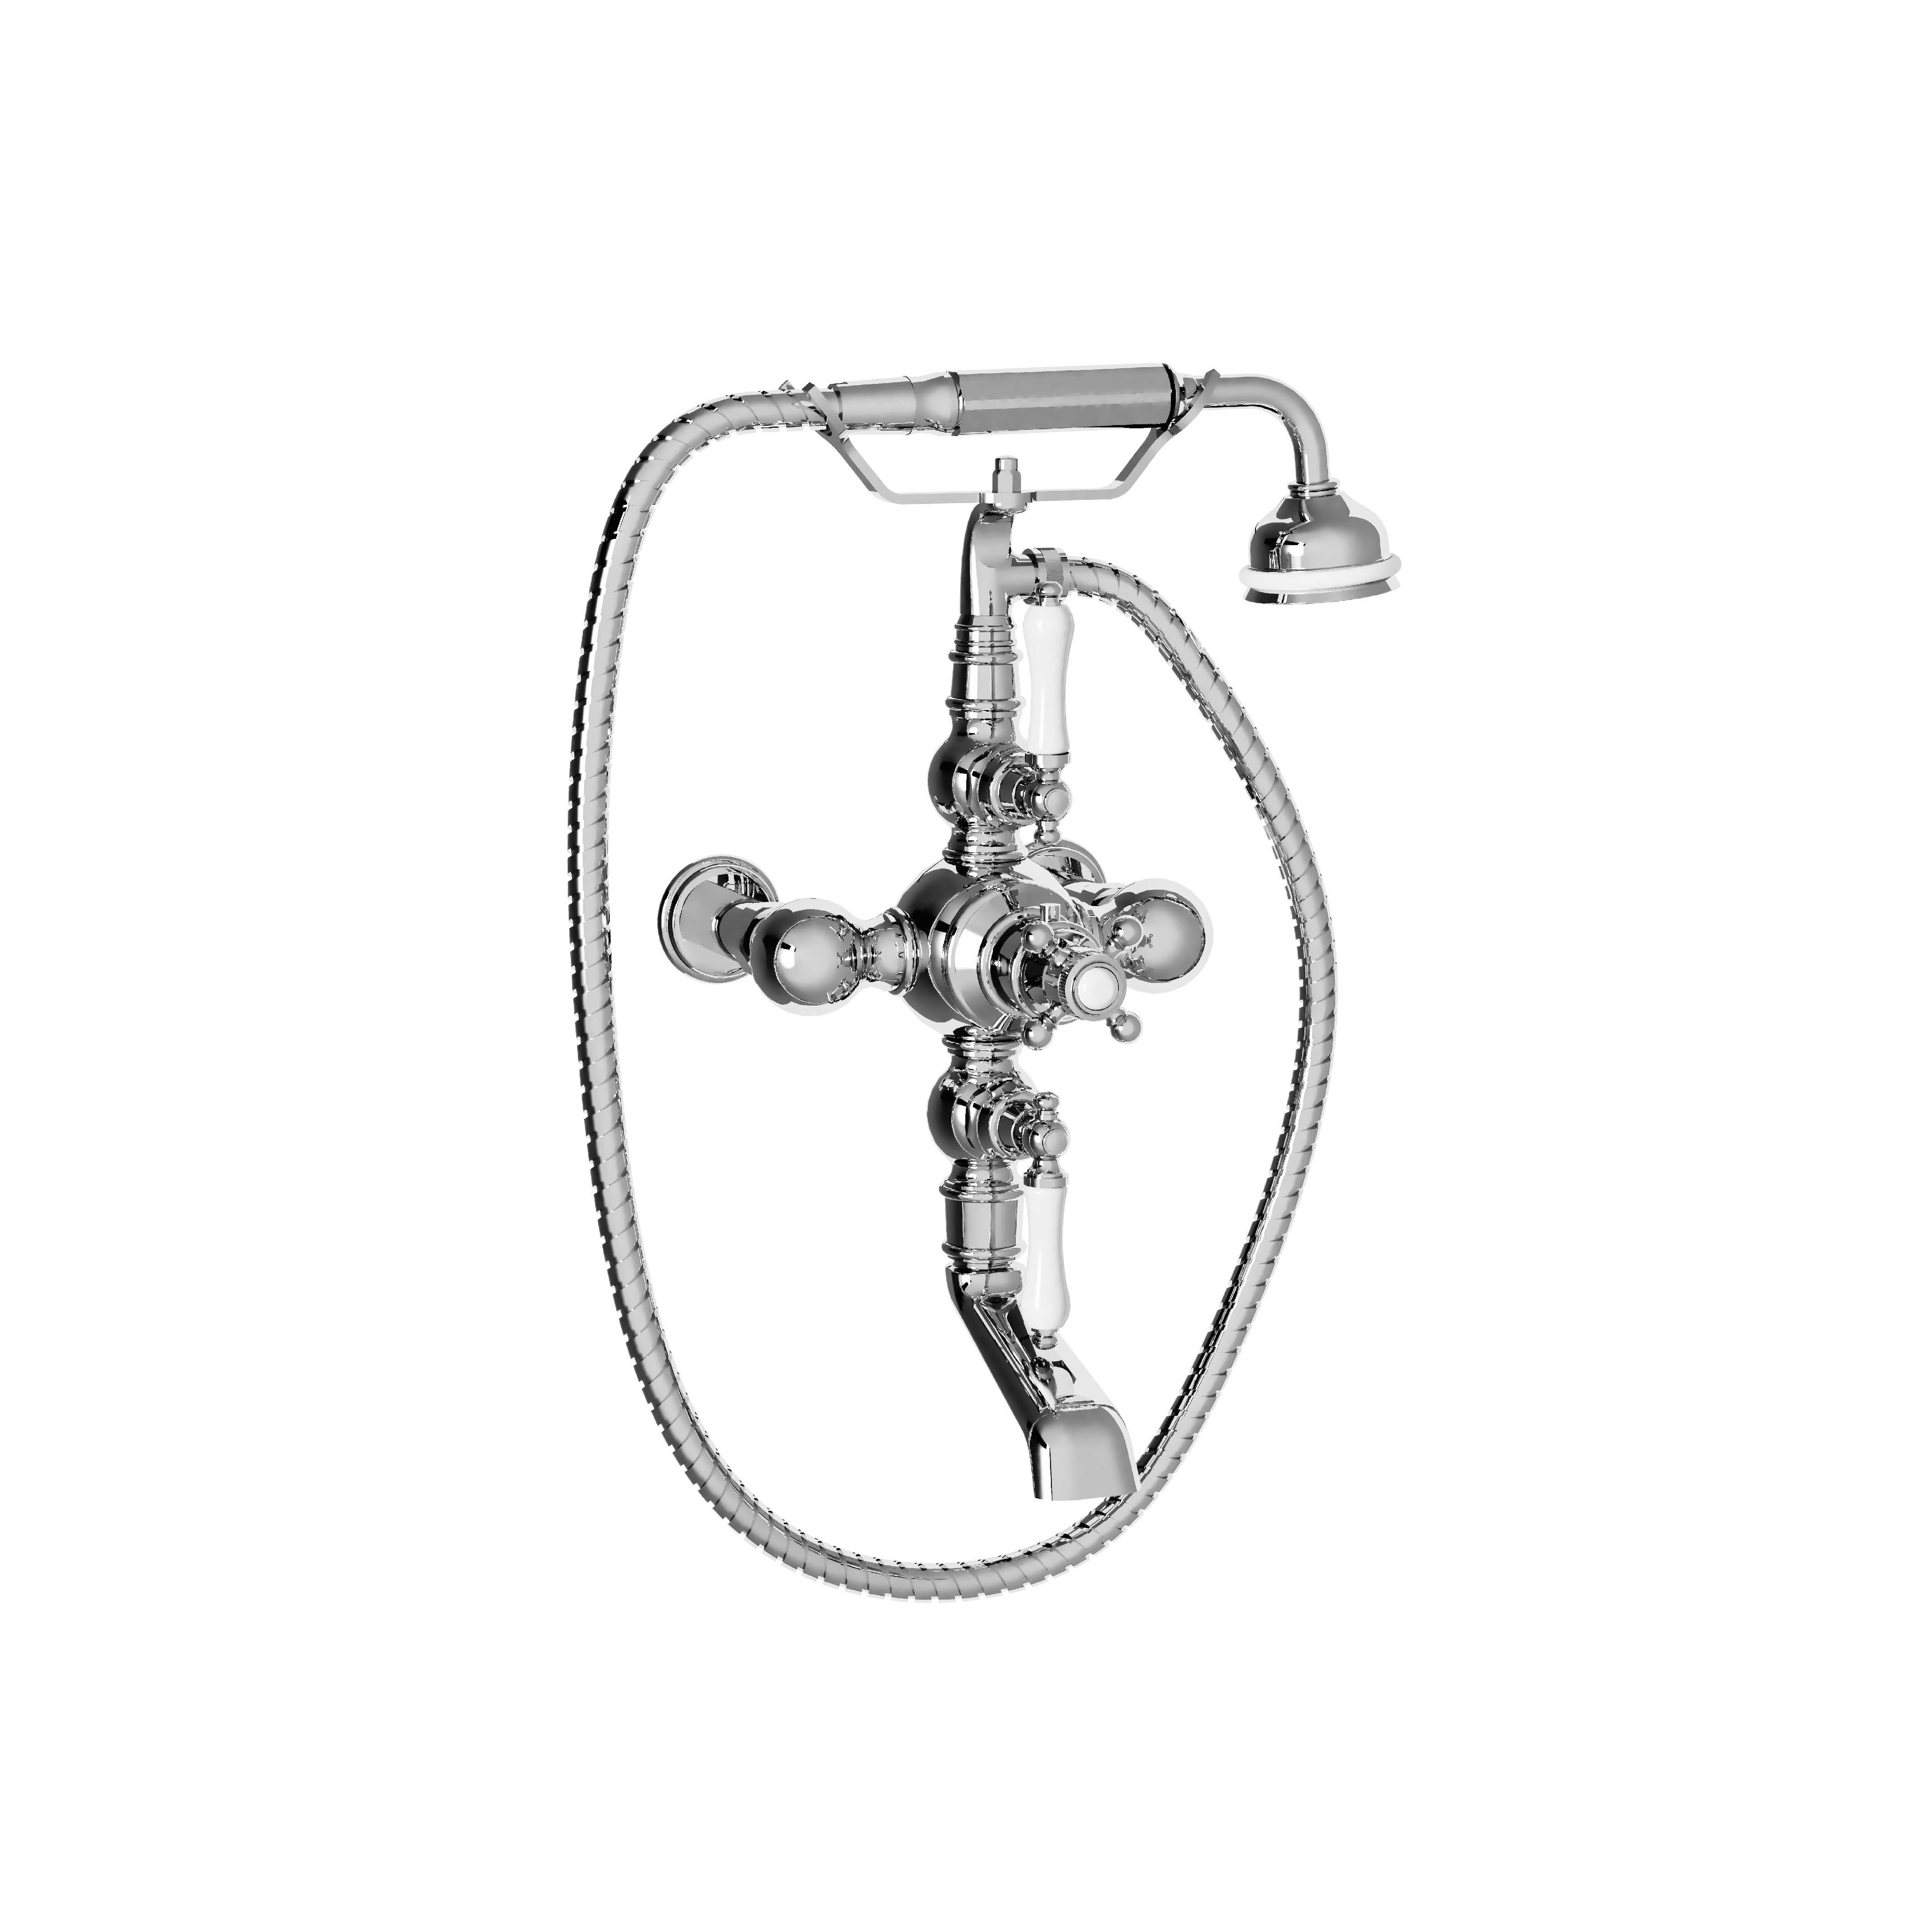 M30-3201T Wall mounted thermo. bath and shower mixer